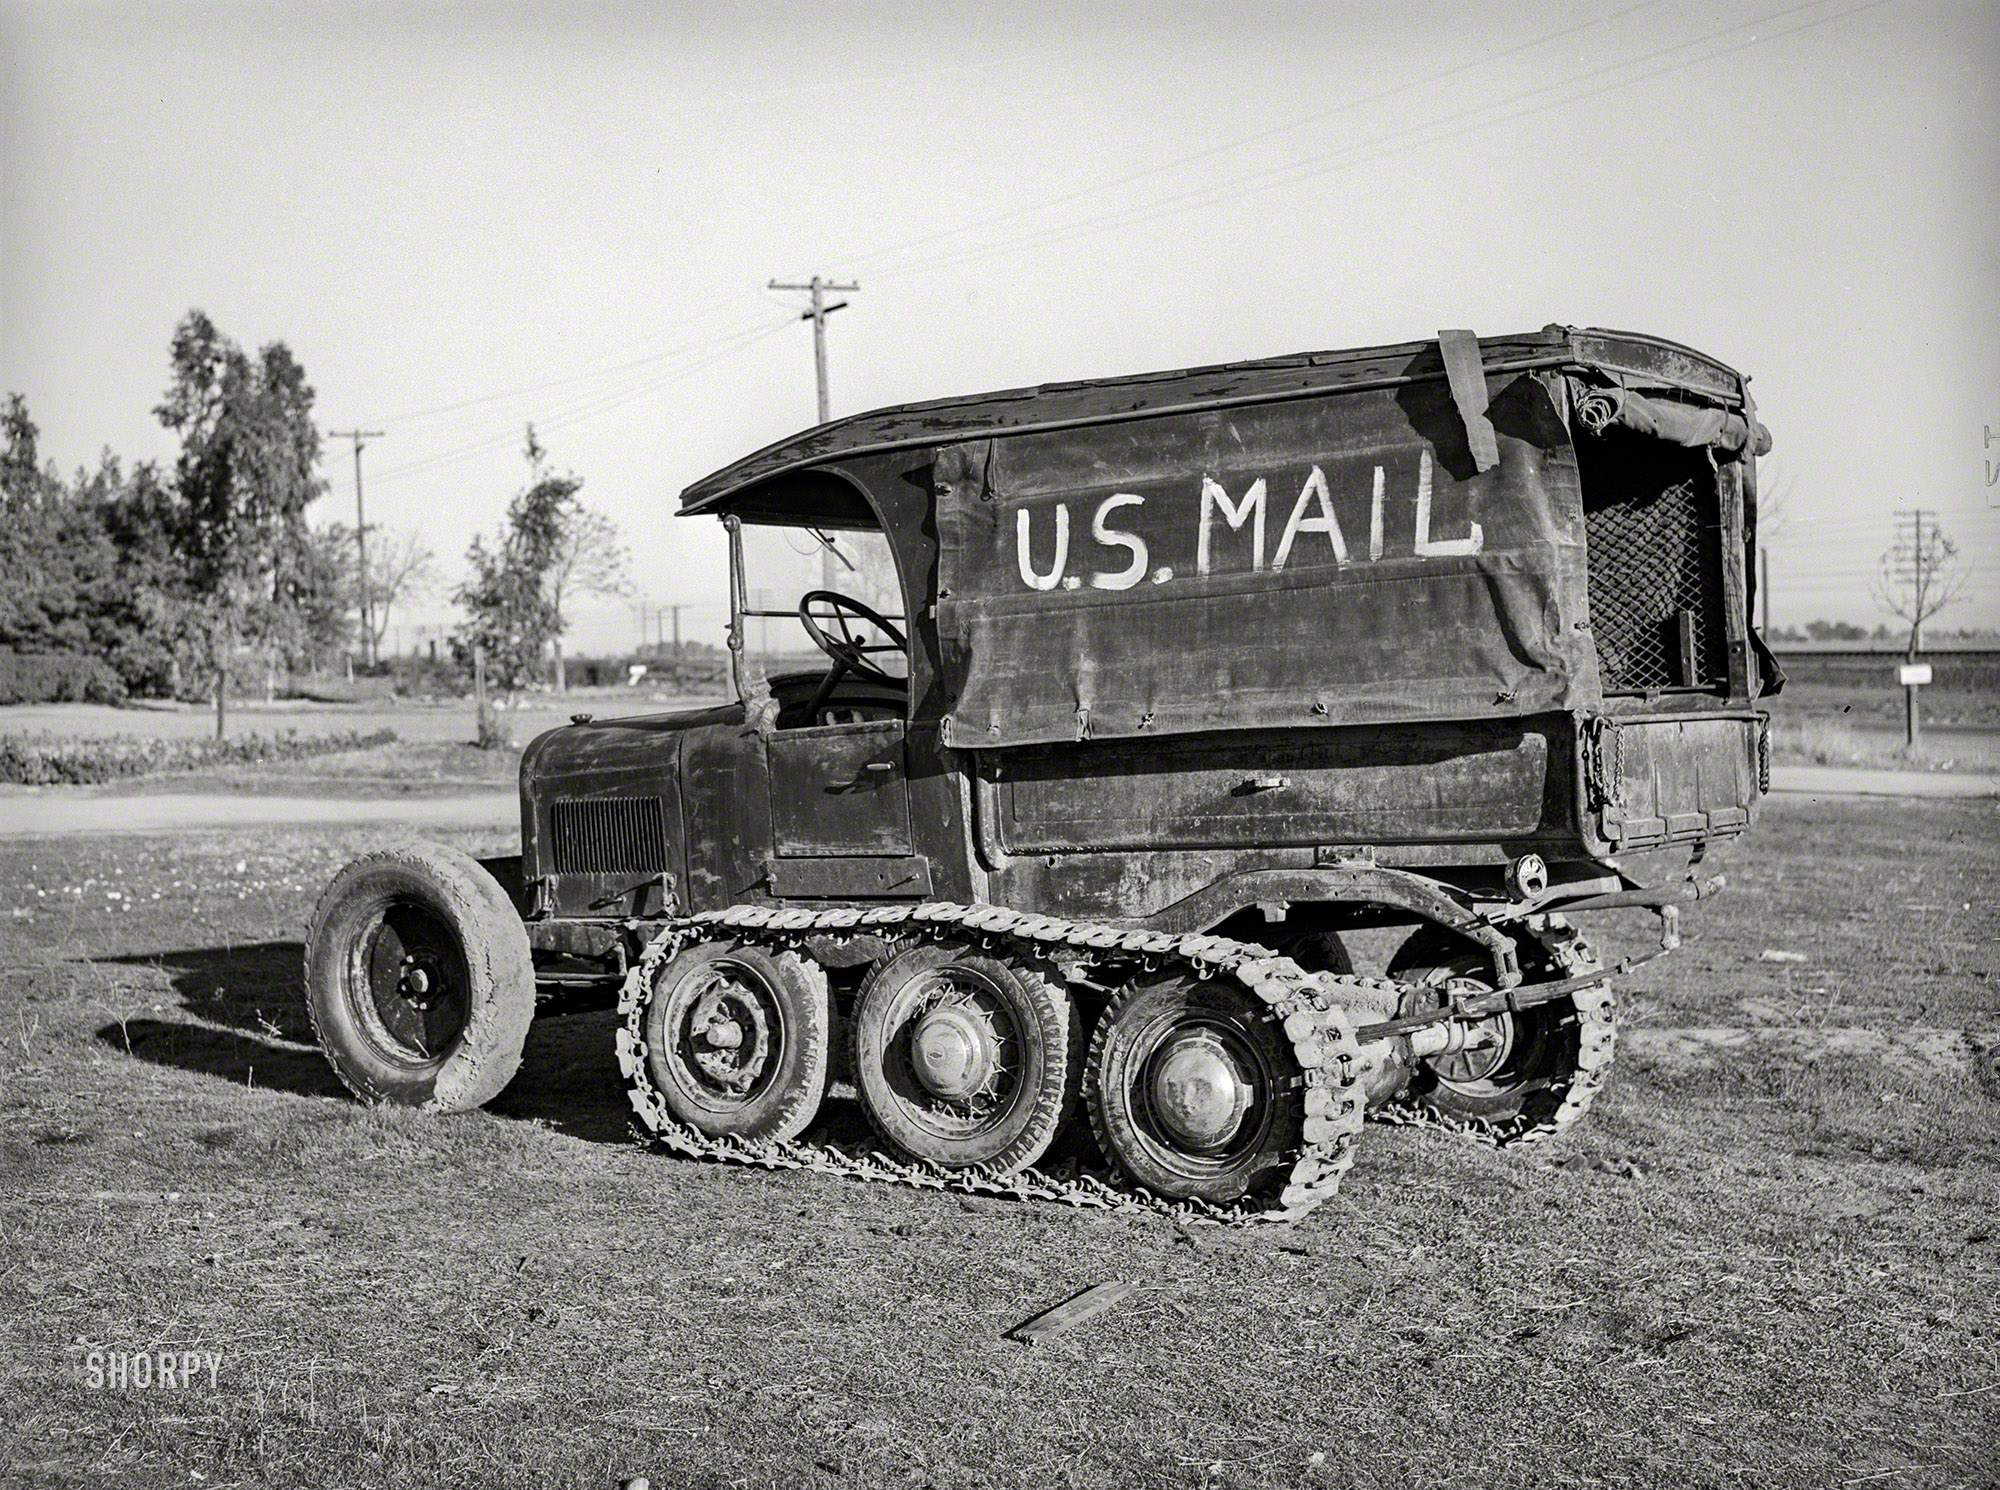 November 1940. "U.S. Mail truck used in snowy mountain sections of Nevada County, California." Acetate negative by Russell Lee. View full size.